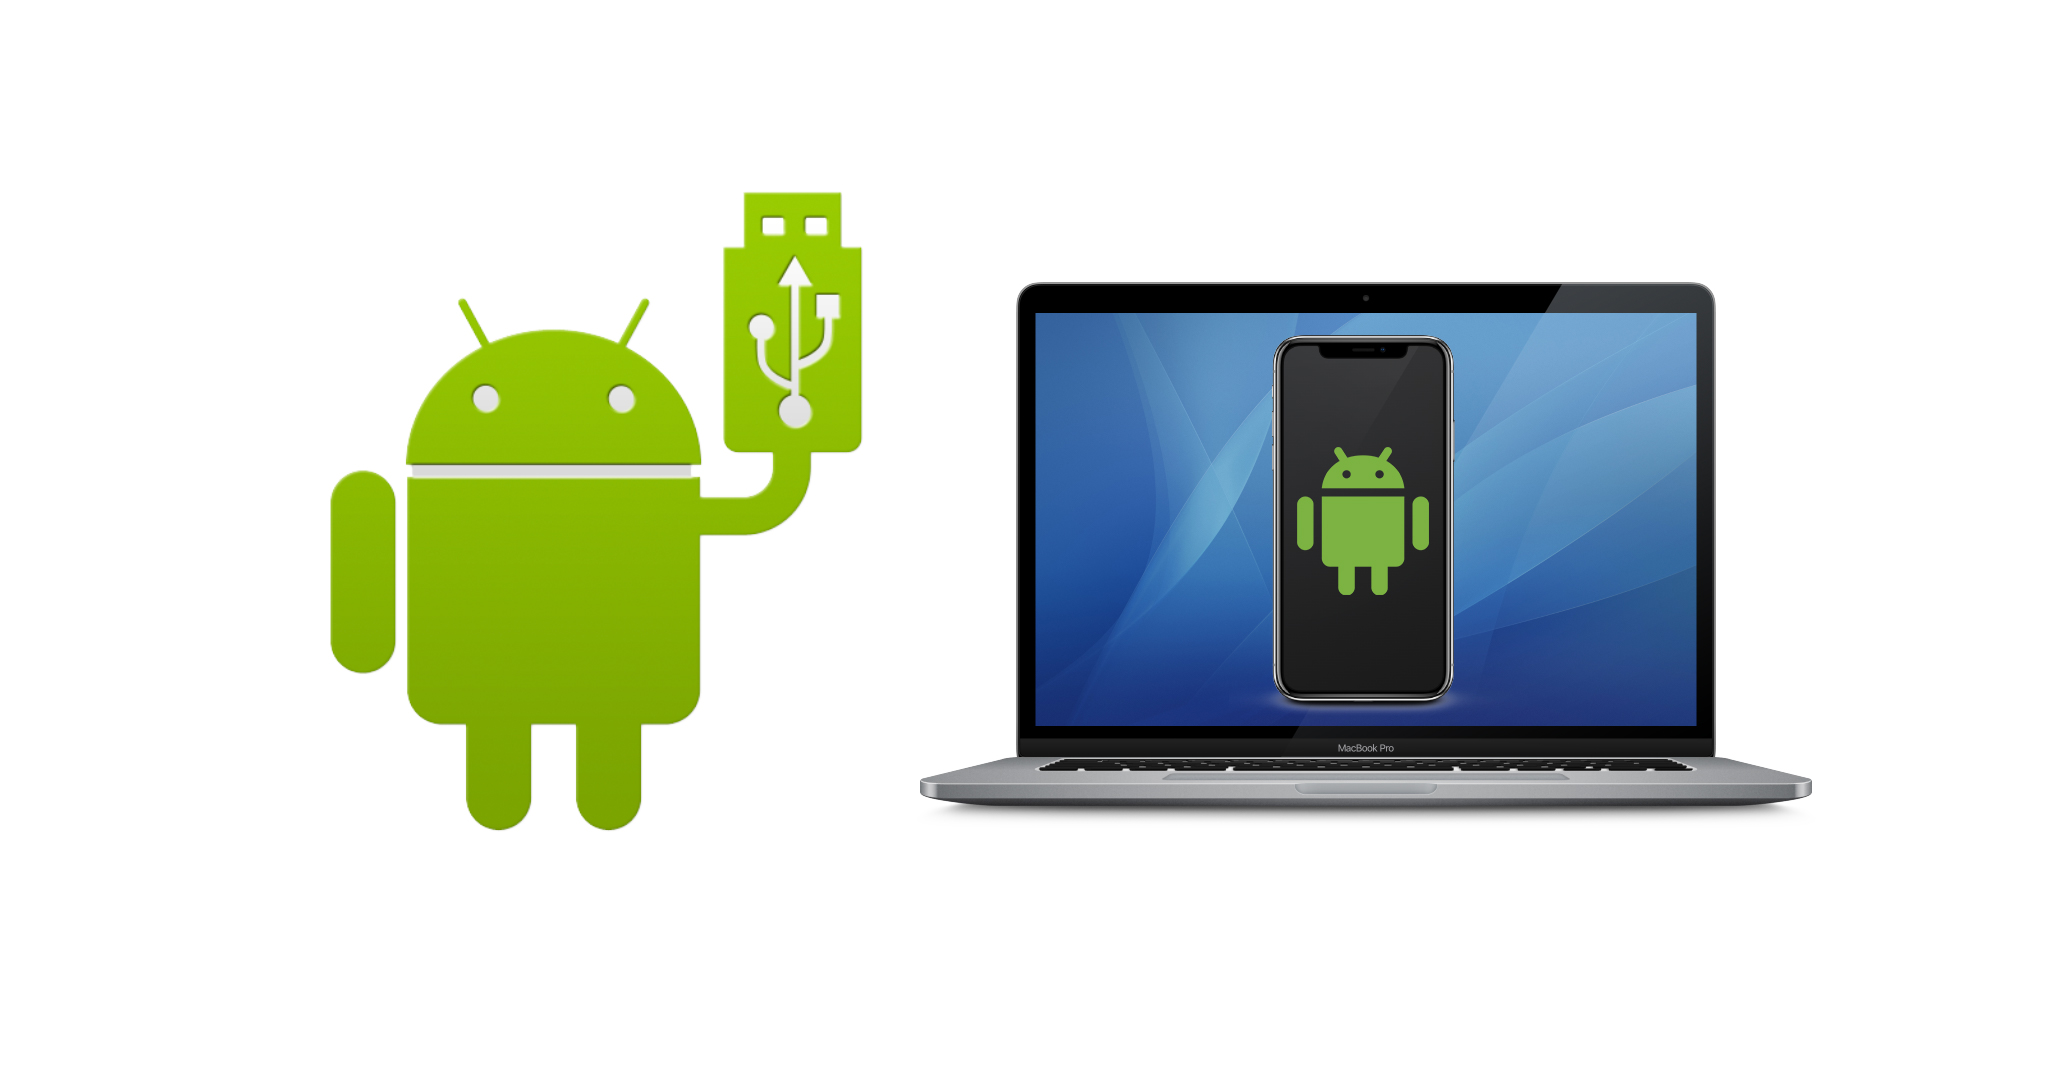 Android、Mac、Mac 存取 Android